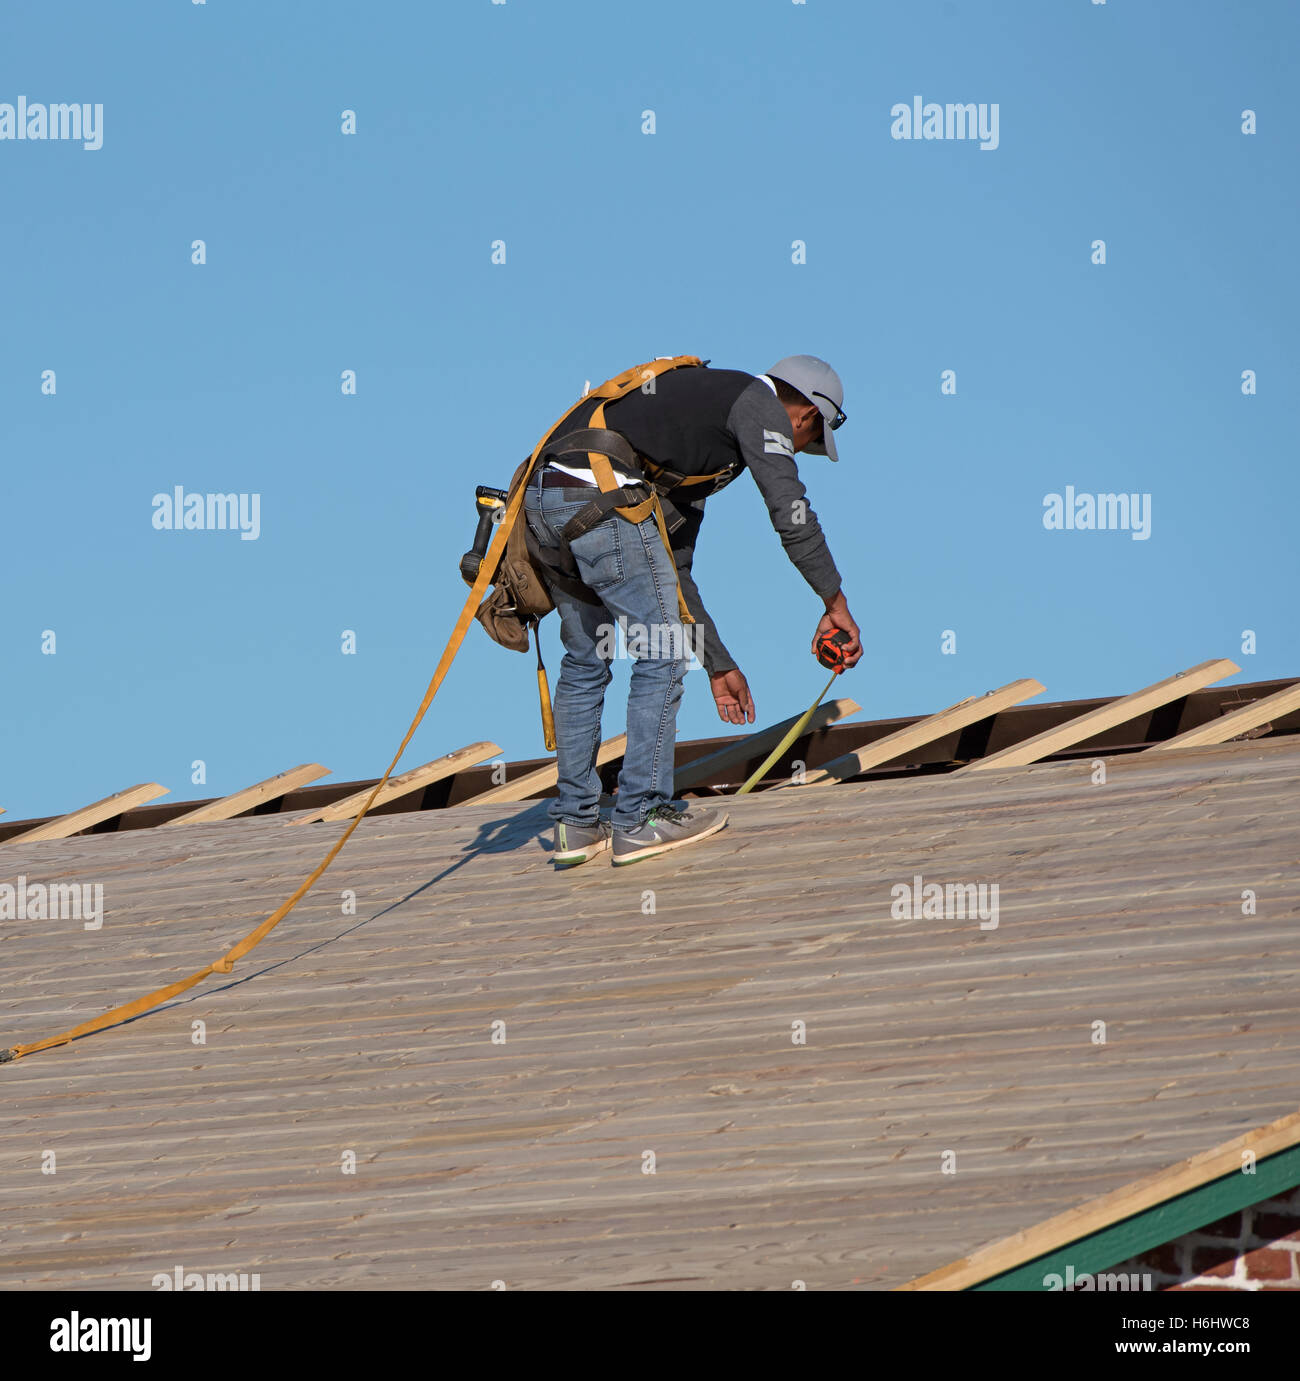 Florida USA Roofer wearing a safety harness and holding a tape measure to  fix wooden slats on a pitched roof Stock Photo - Alamy